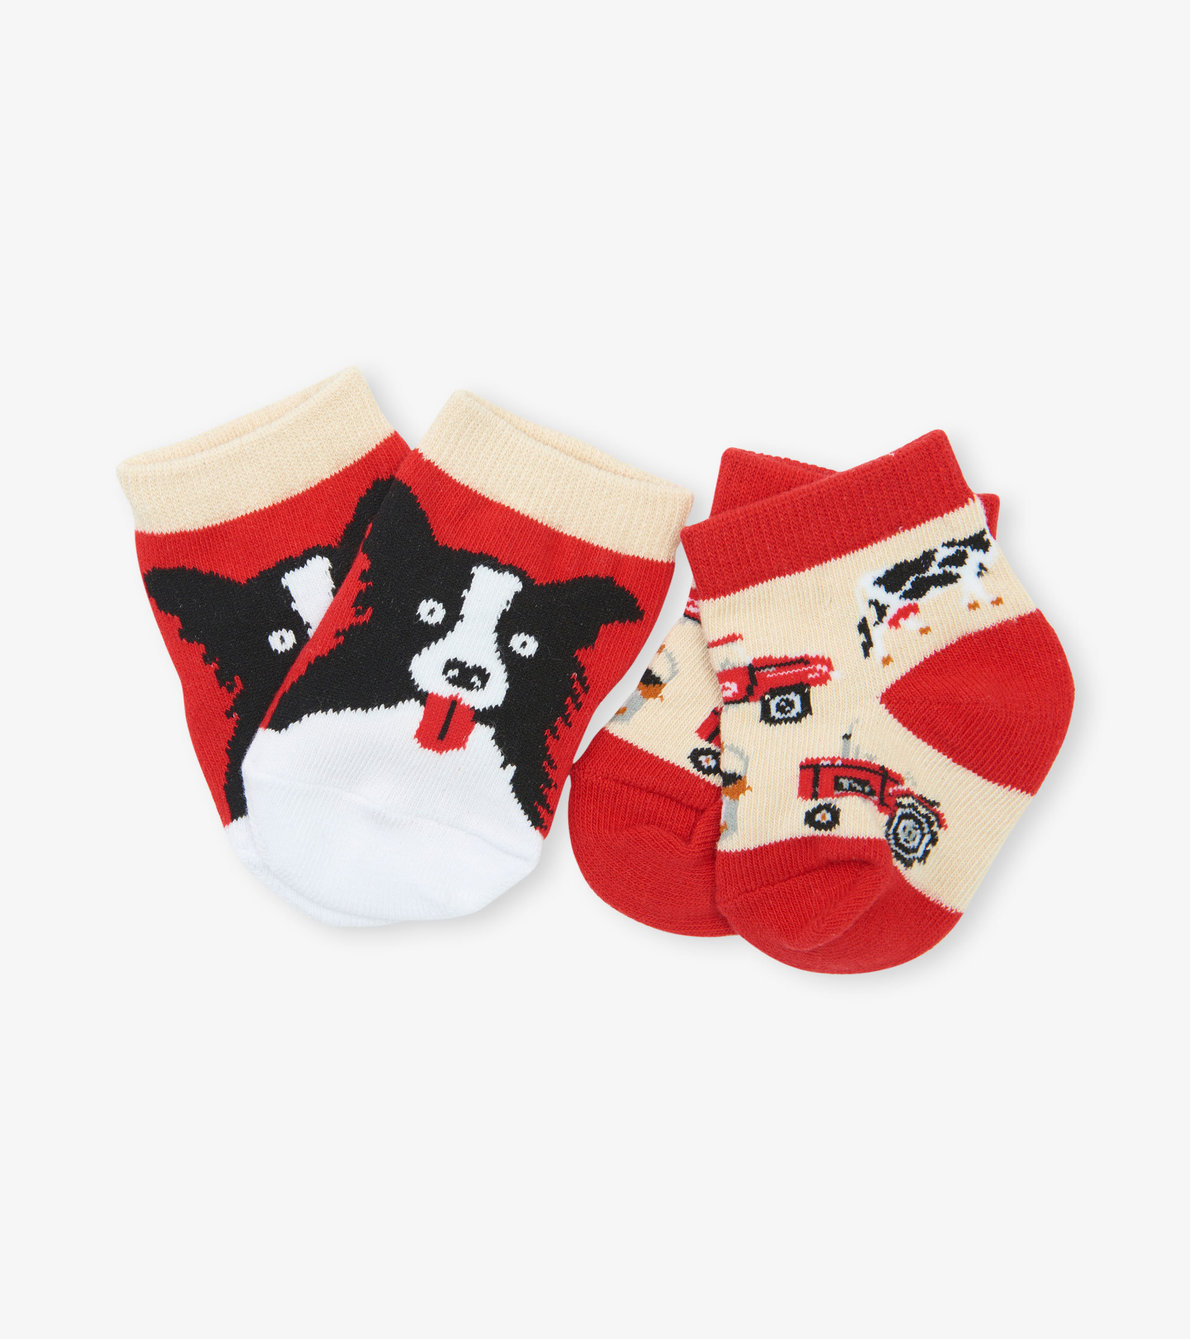 View larger image of Farm Life 2-Pack Baby Socks